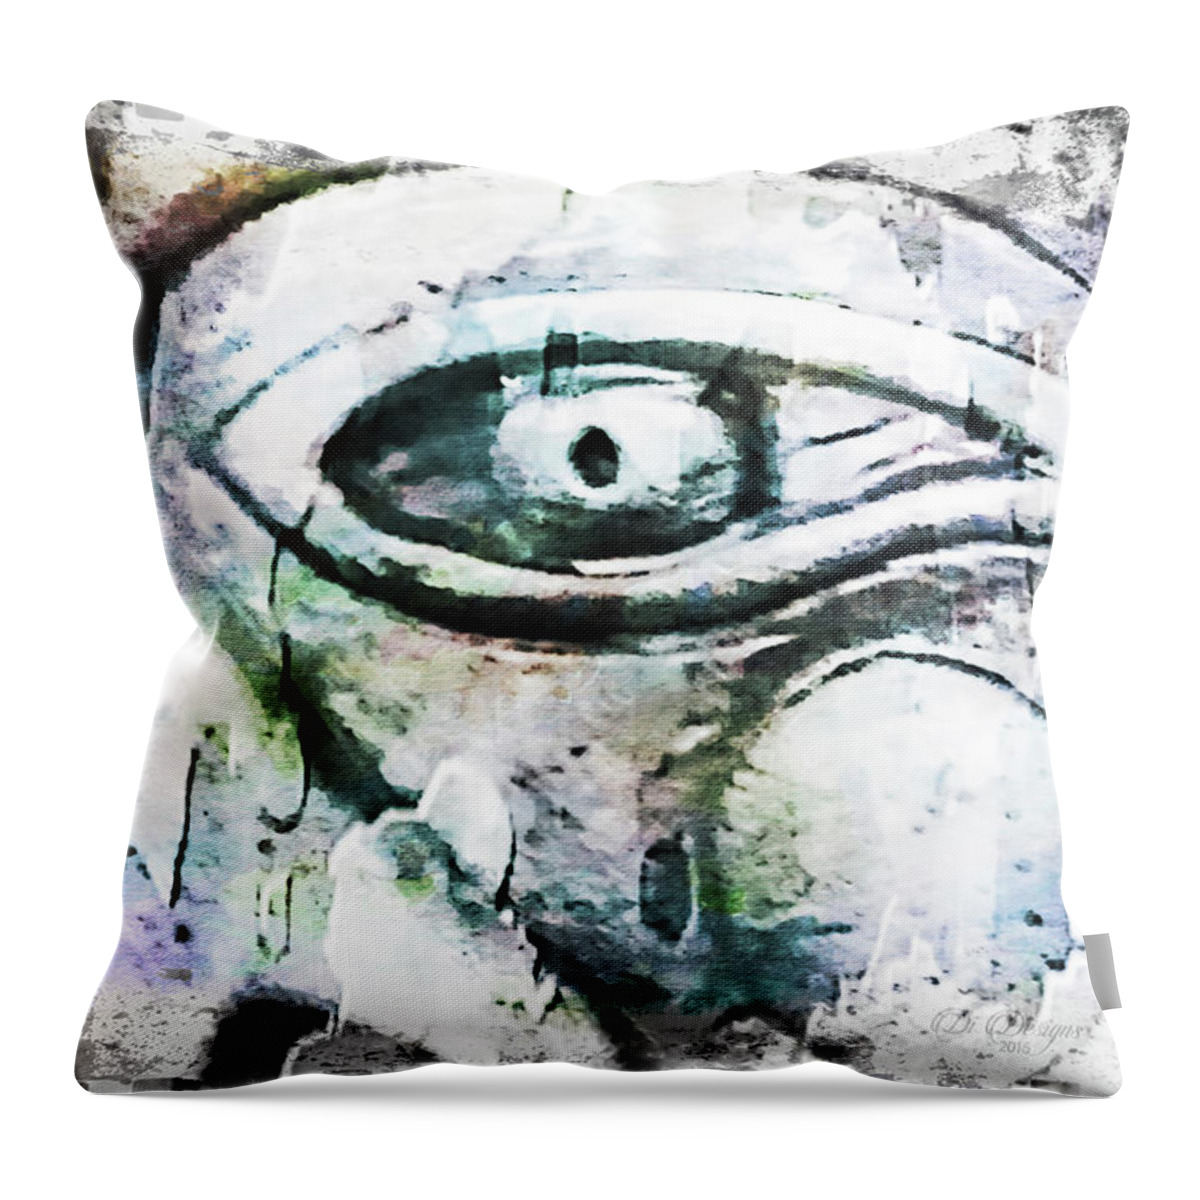 Mask Throw Pillow featuring the mixed media Silent Scream by DiDesigns Graphics